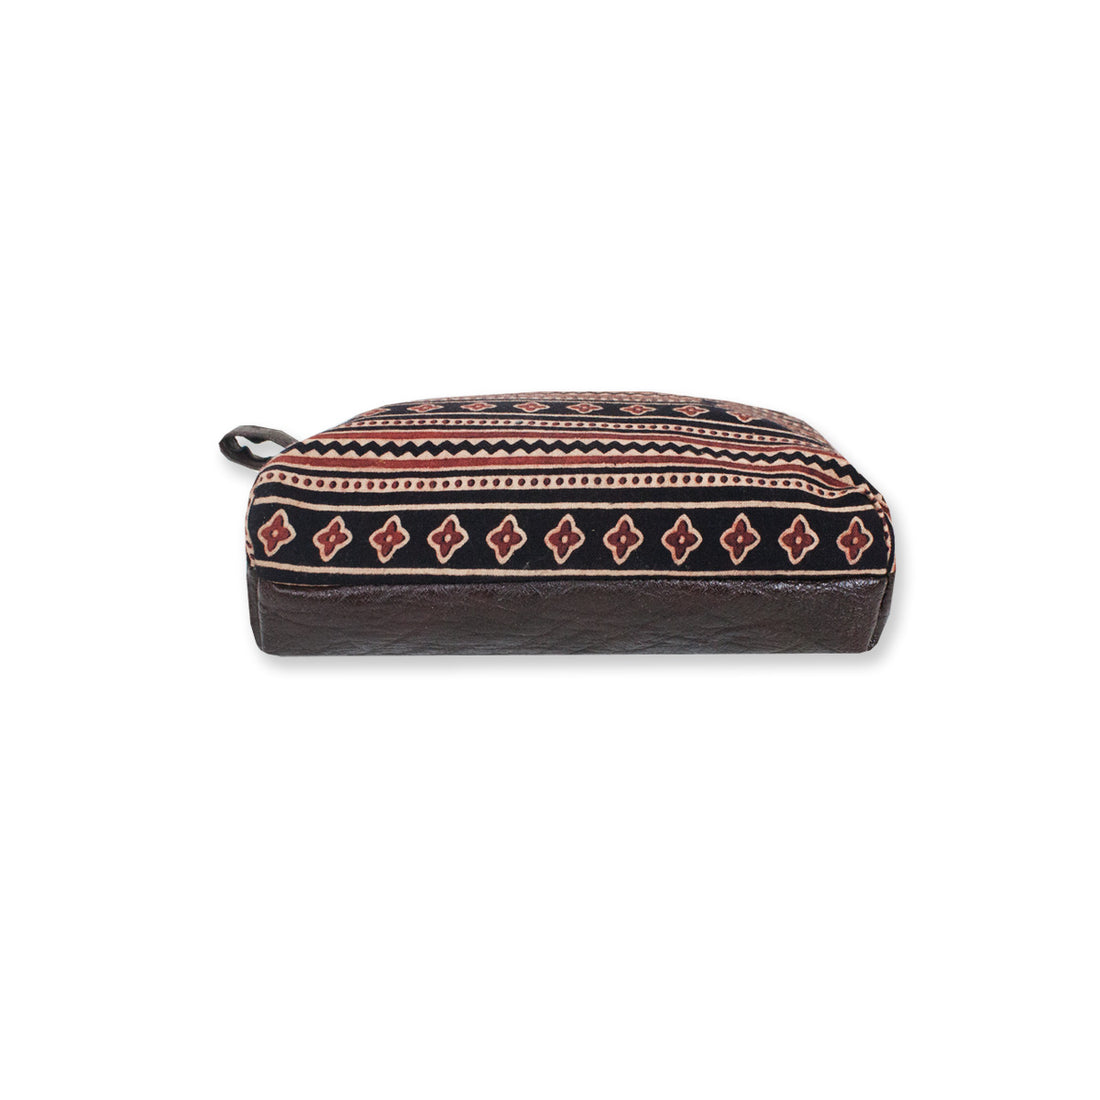 Aztec Block Printed Pouch